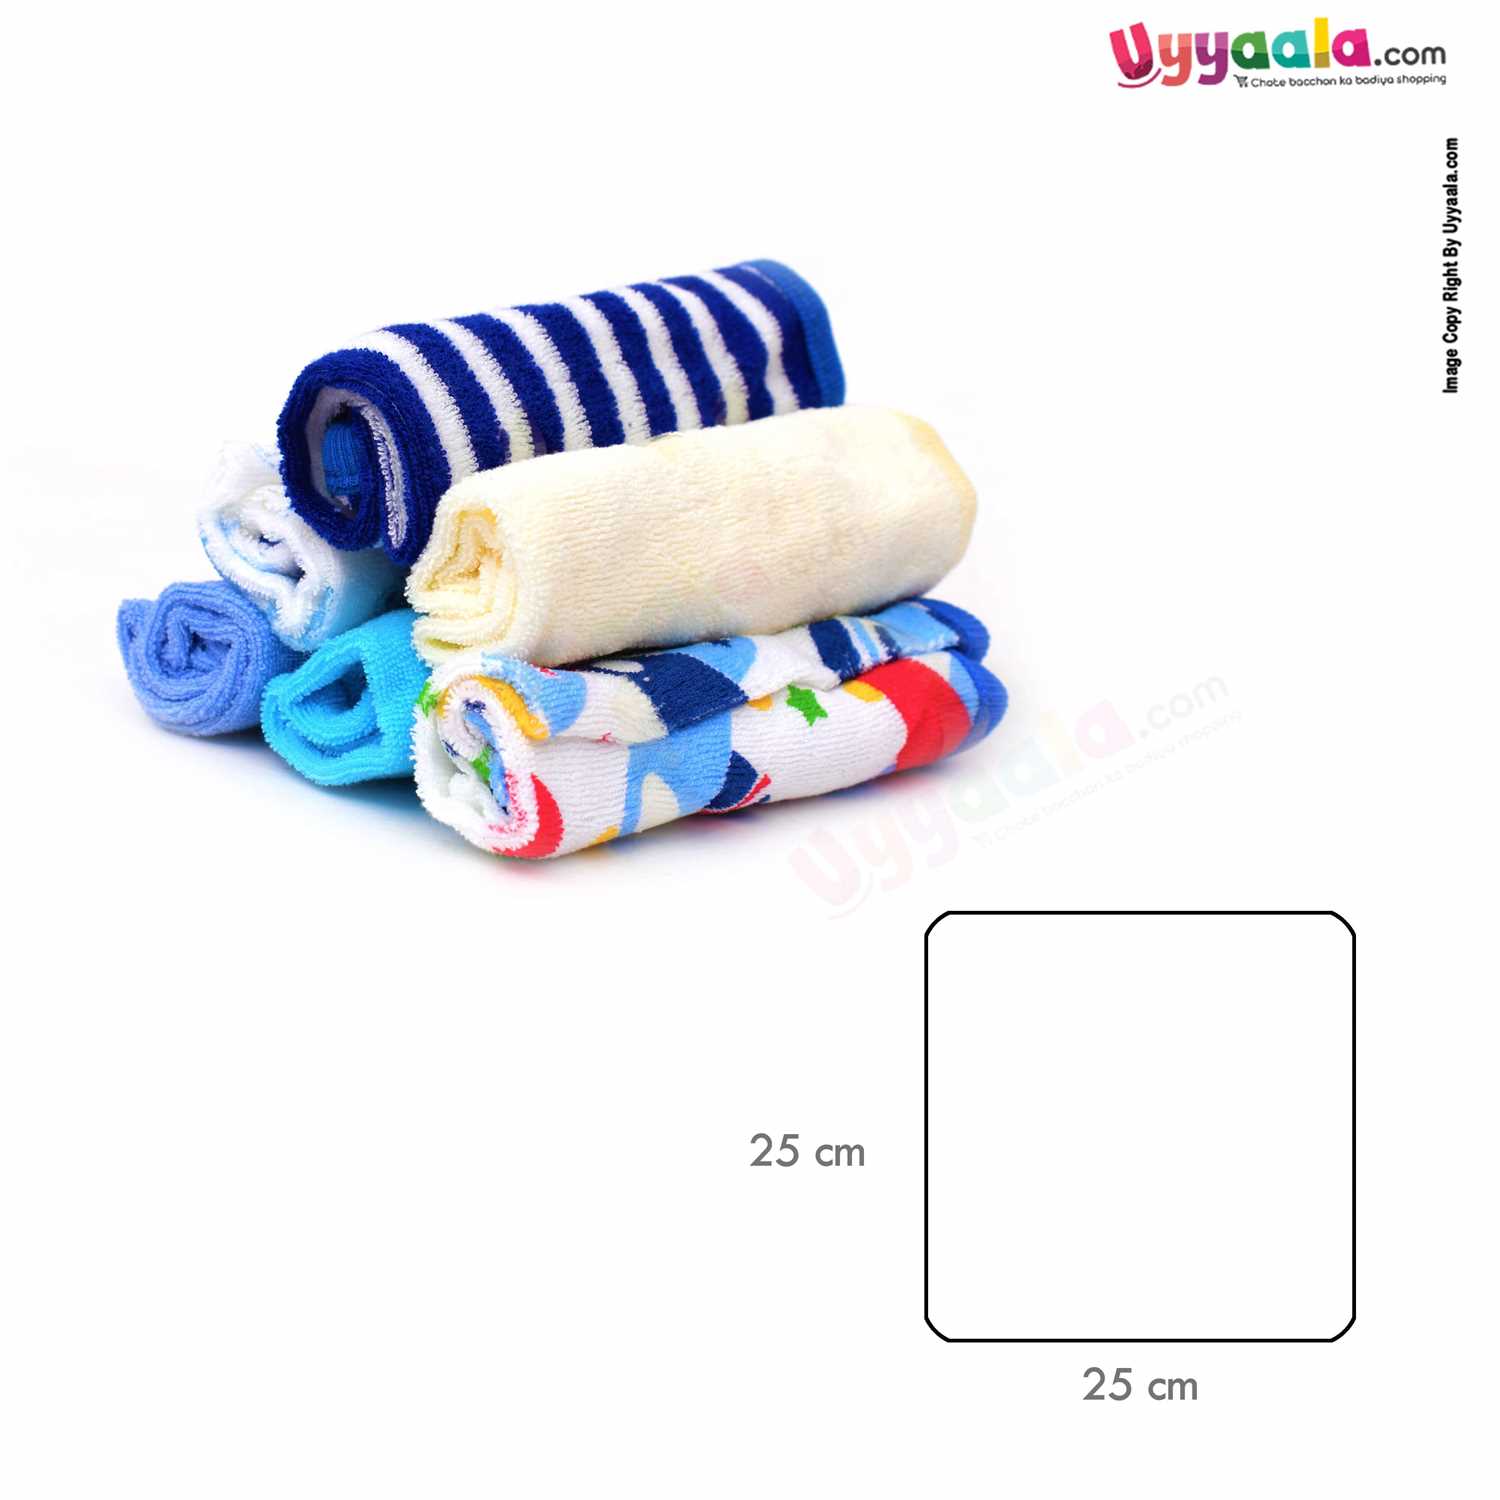 FASHION BABY Napkins (Wash Cloths) For Babies, Pack of 6 with Assorted Prints- Size(25*25cm), 0+m, Multicolor